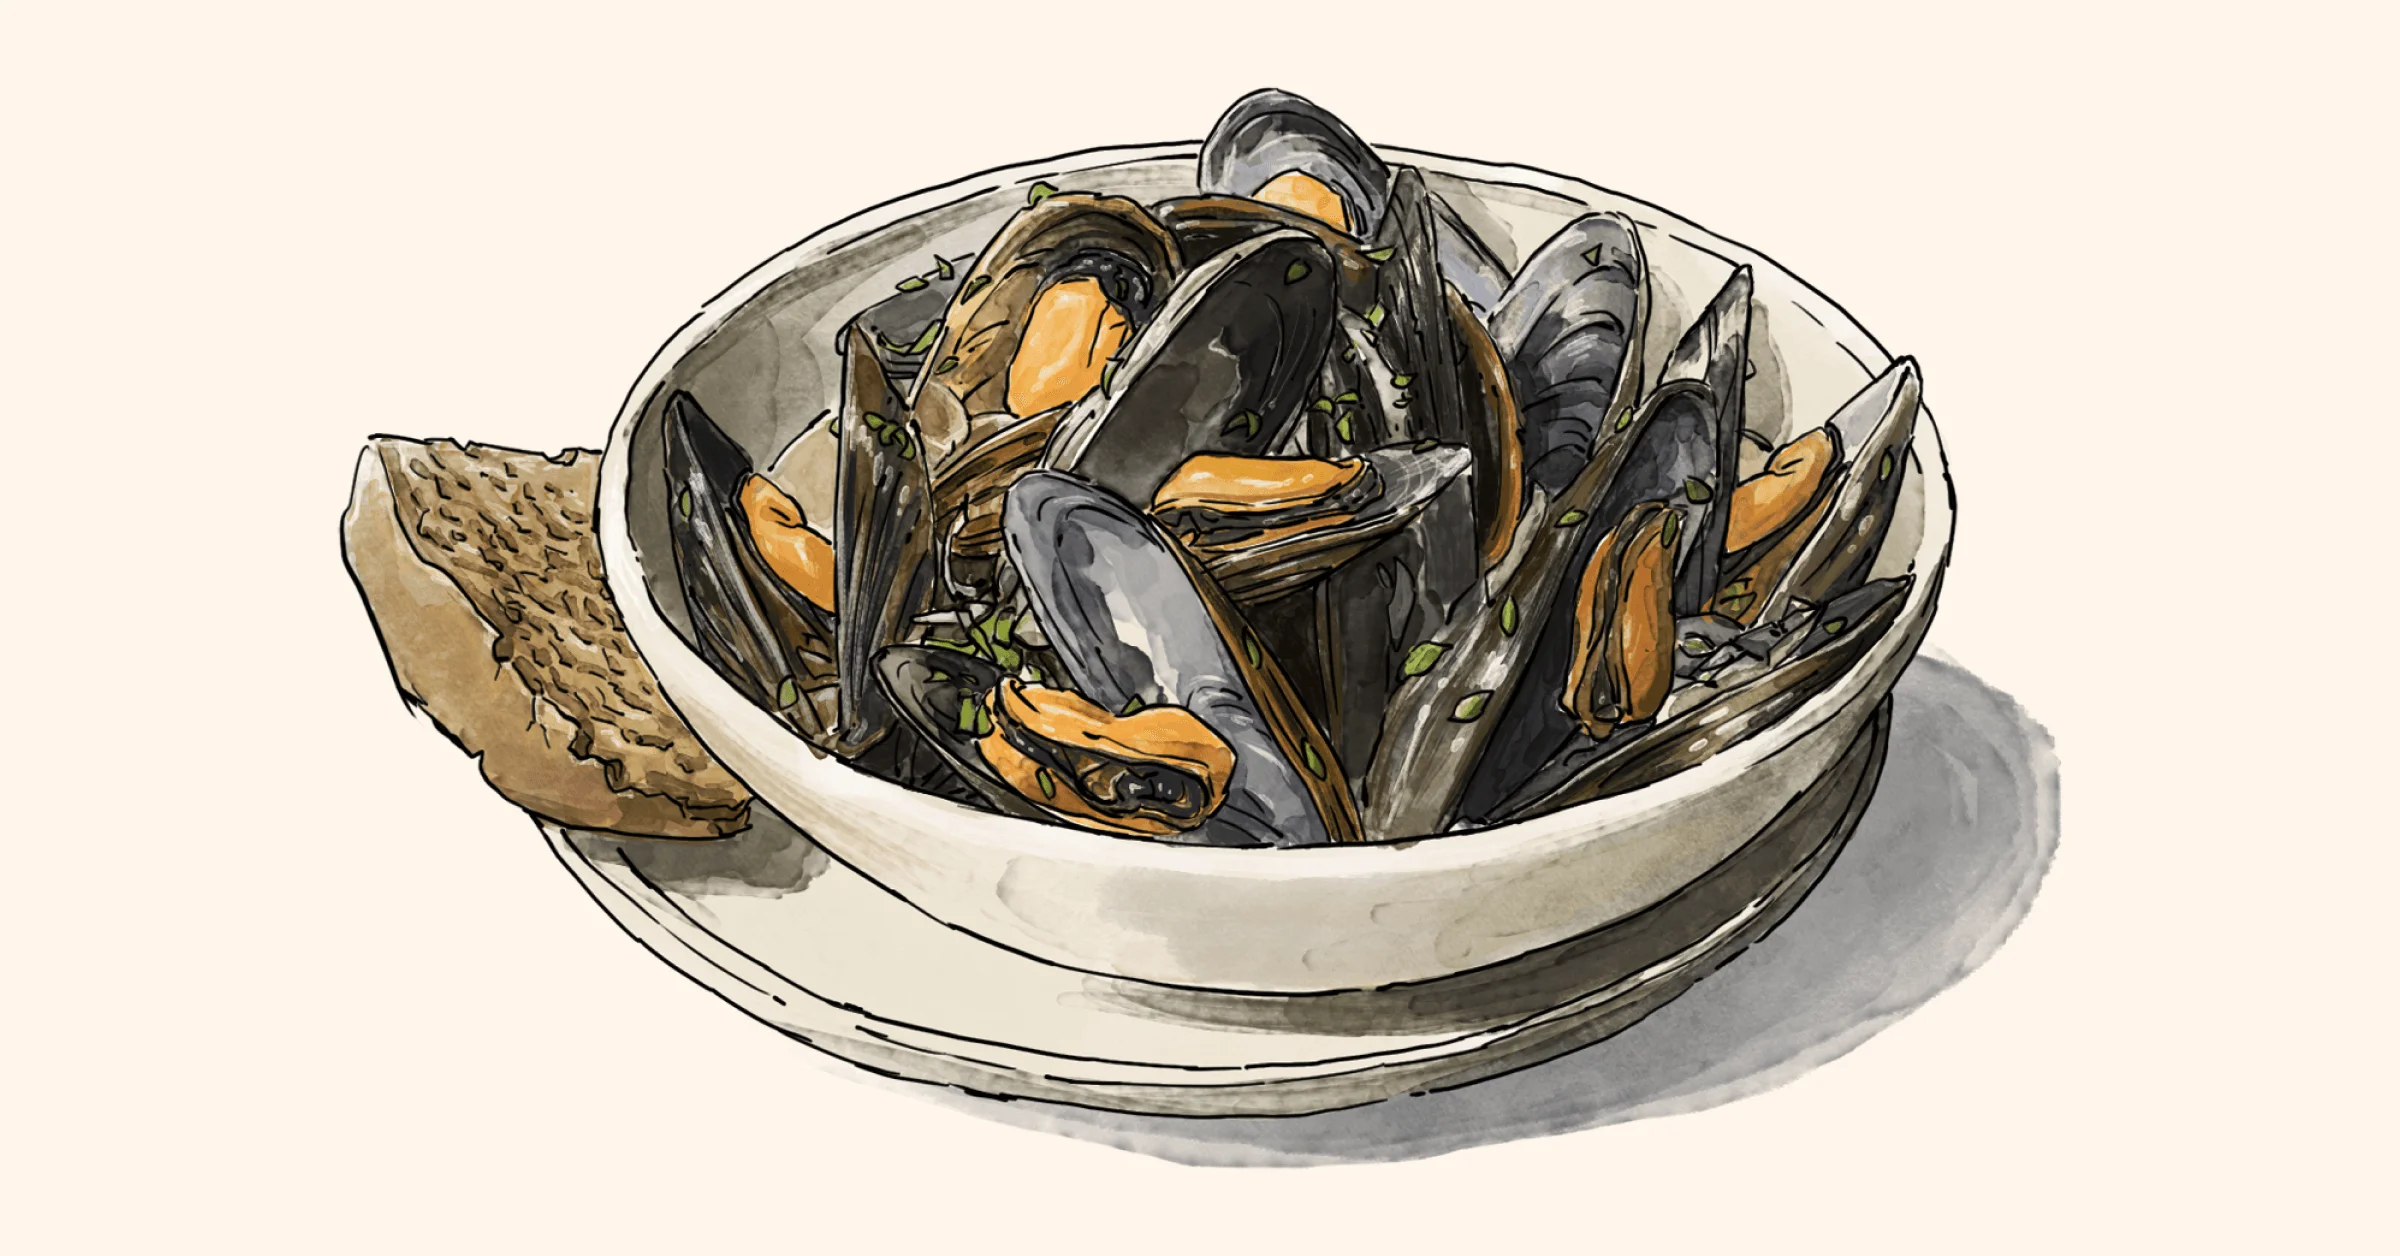 Illustration of Lexi’s Birthday Mussels